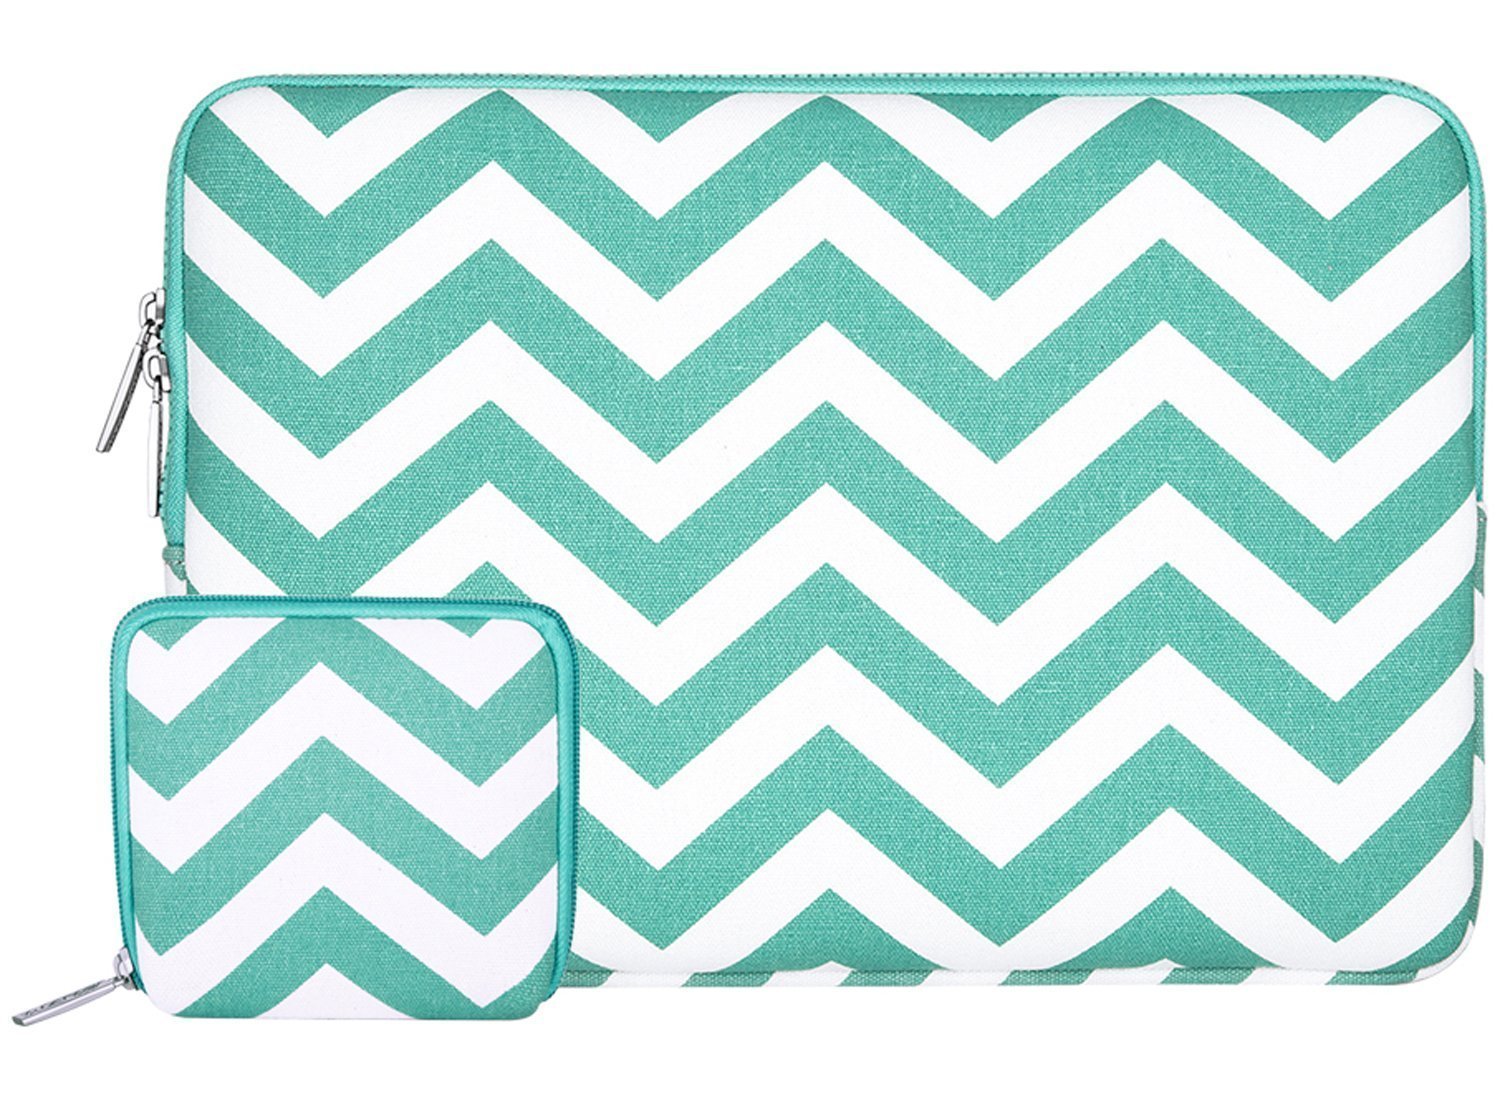 MOSISO Laptop Sleeve Bag Compatible 15-15.6 Inch MacBook Pro, Notebook Computer with Small Case, Chevron Style Canvas Fabric Case Cover, Hot Blue